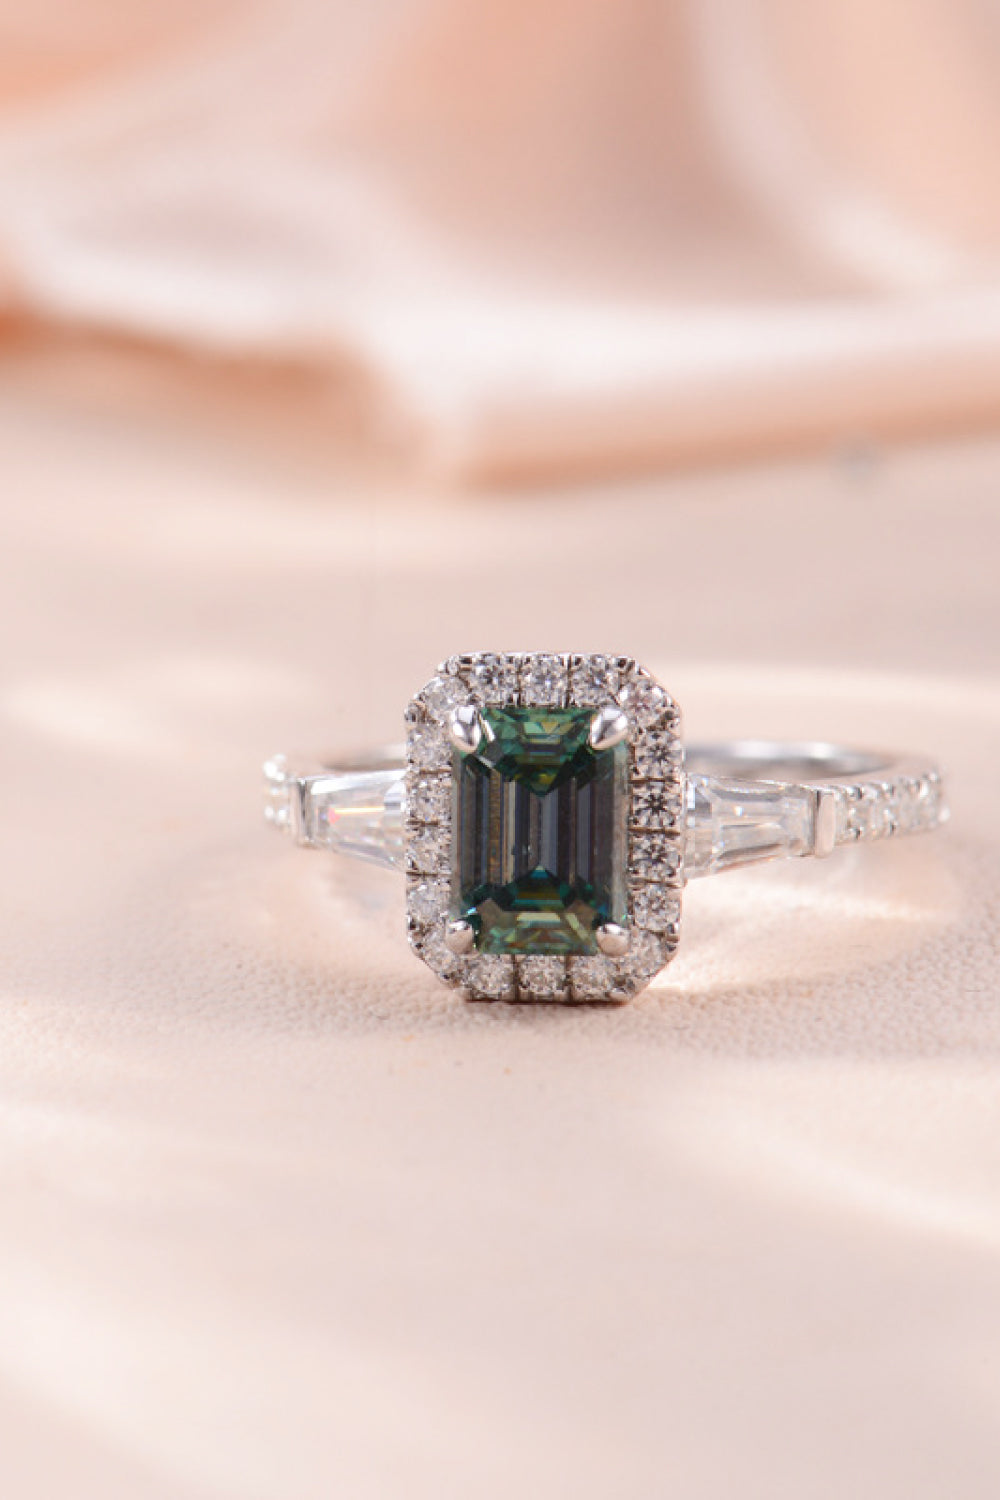 1 Carat Green Emerald-Cut Moissanite Platinum Over Pure Sterling Silver Ring - Sparkala